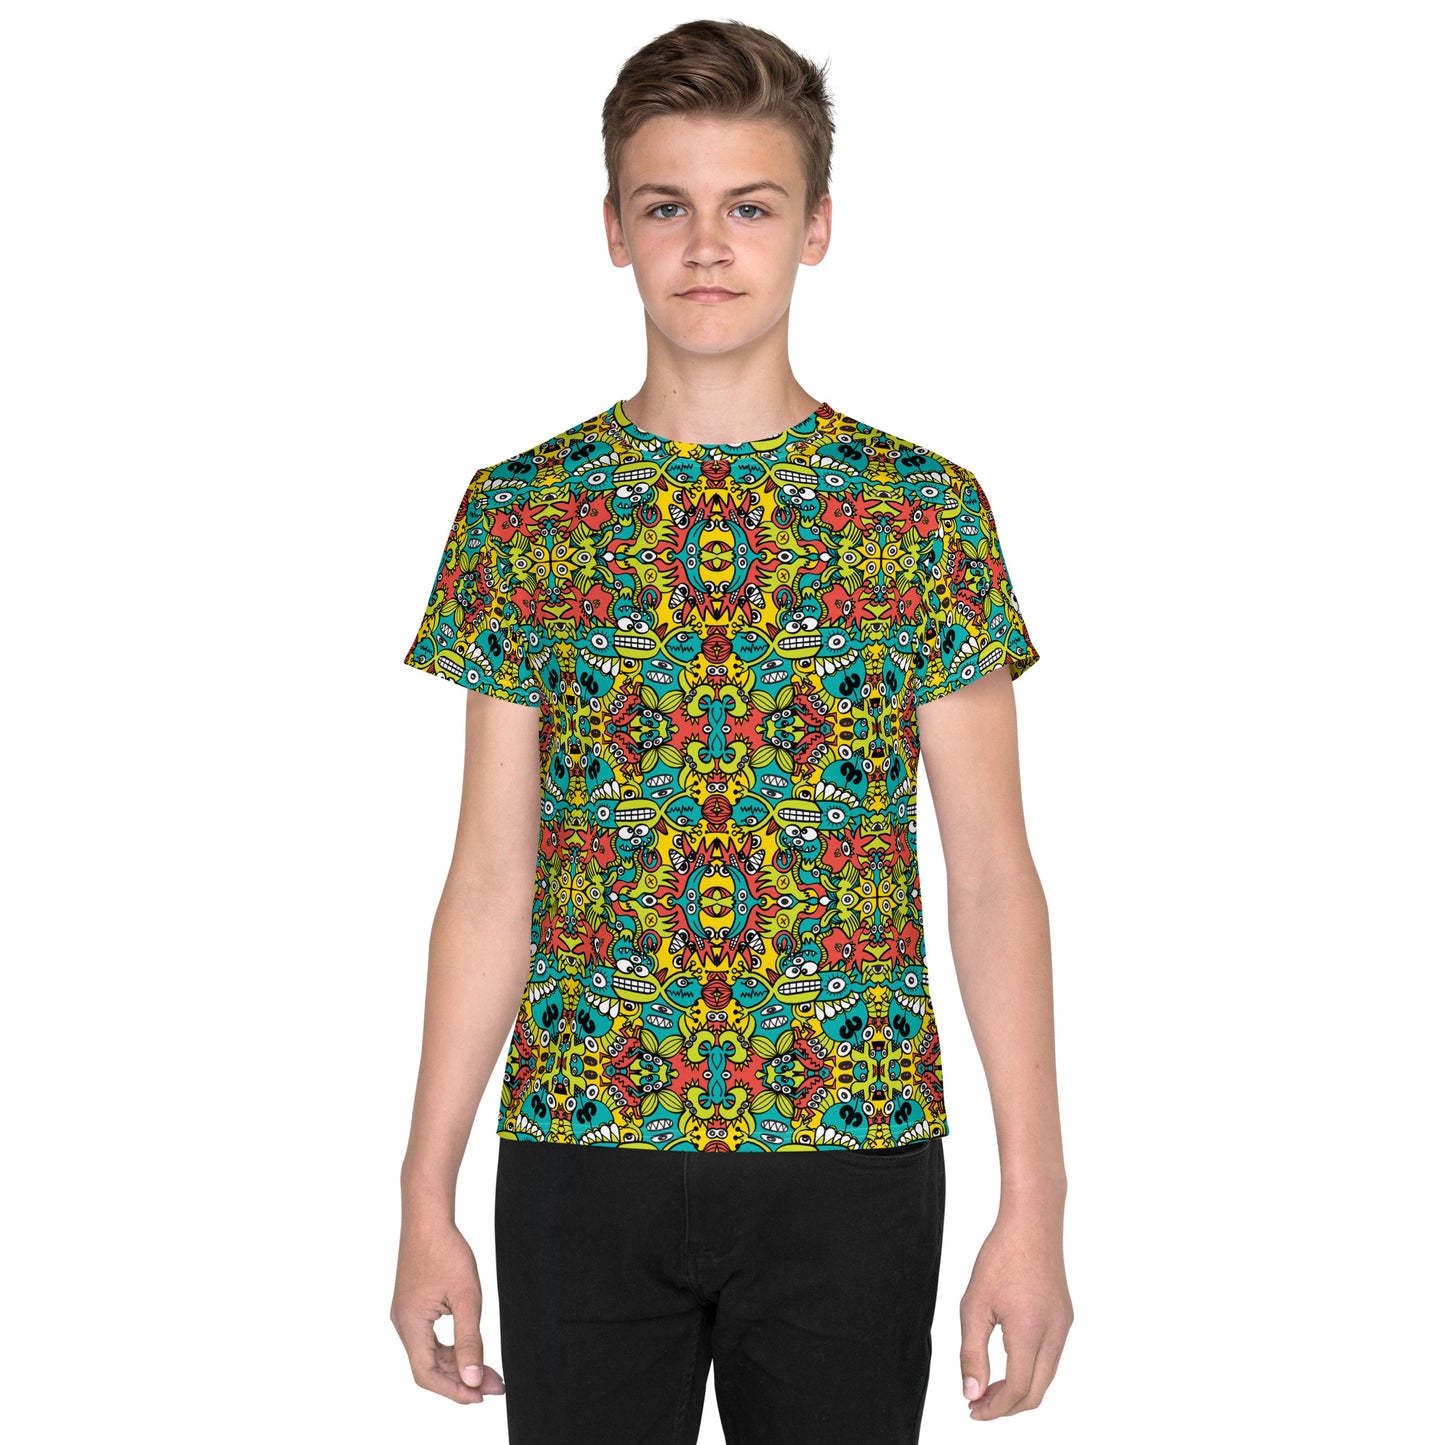 Doodle Dreamscape: Cosmic Critter Carnival - Youth crew neck t-shirt. Front view